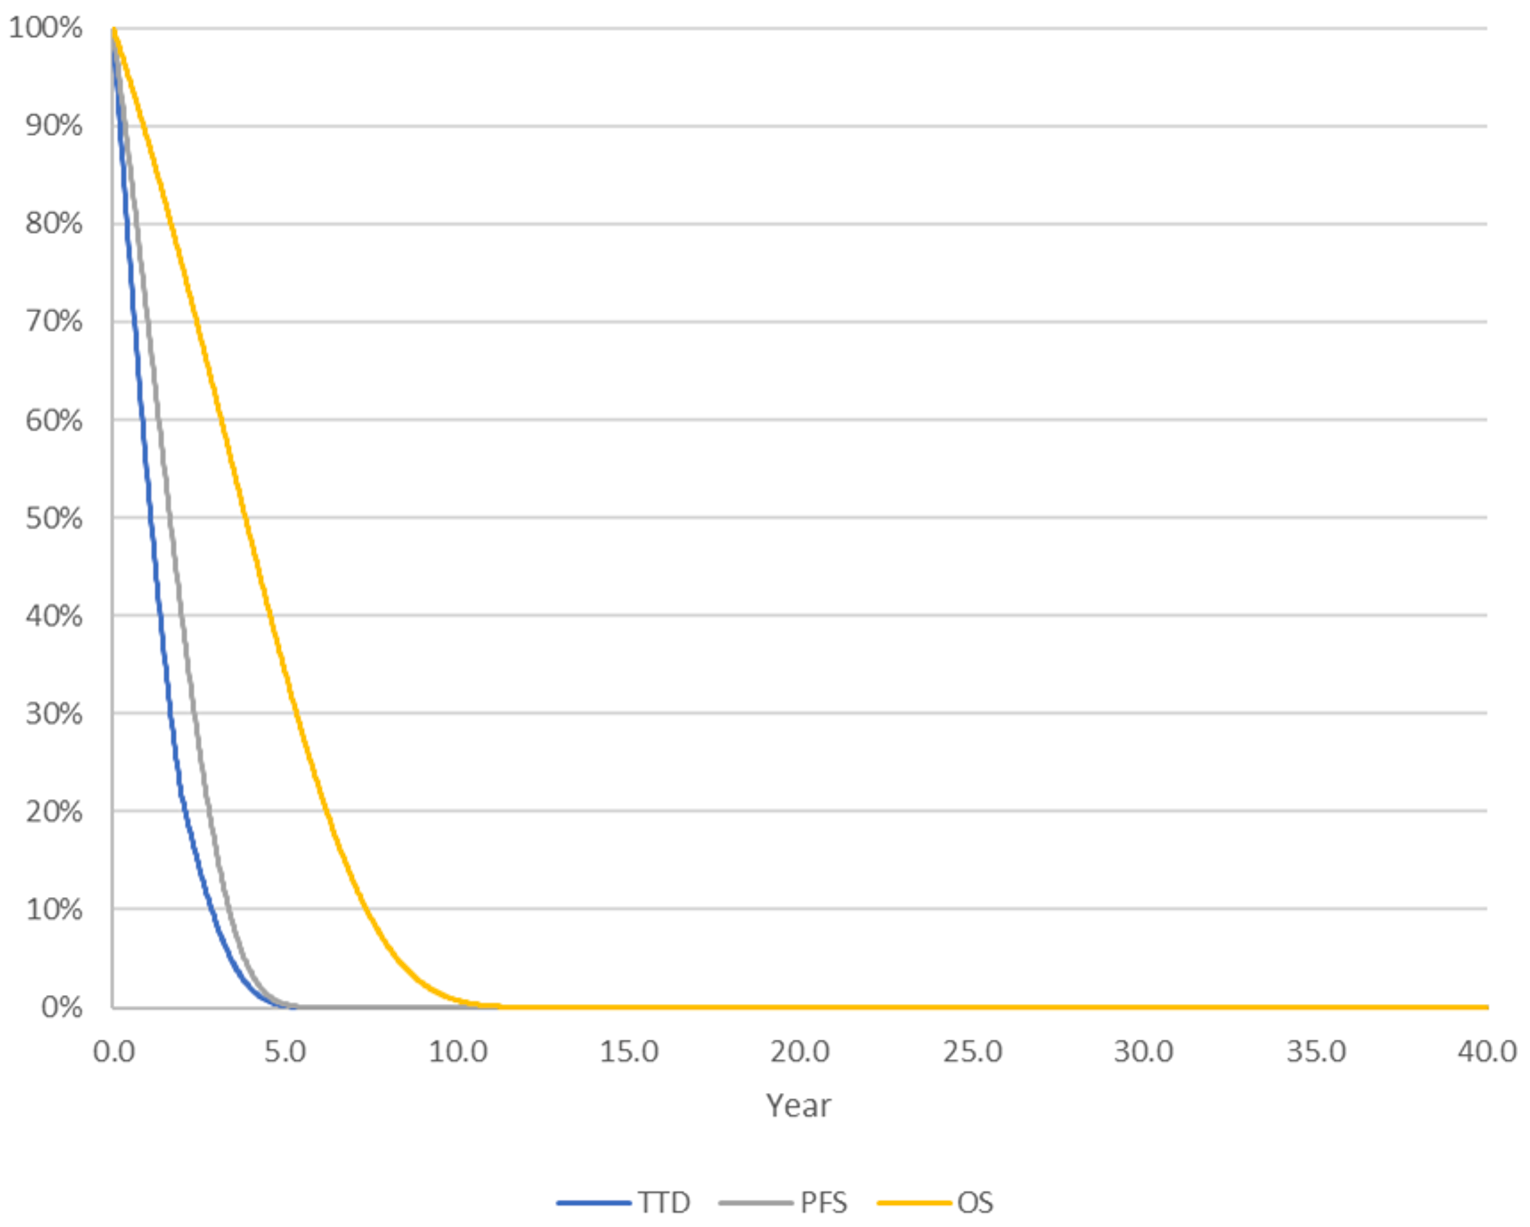 The figure outlines what proportion of the cohort who received Kd have either discontinued therapy, progressed, or died at a given point in time. The y-axis represents the proportion of patients, expressed as a percentage. The x-axis represents time, measured in years.